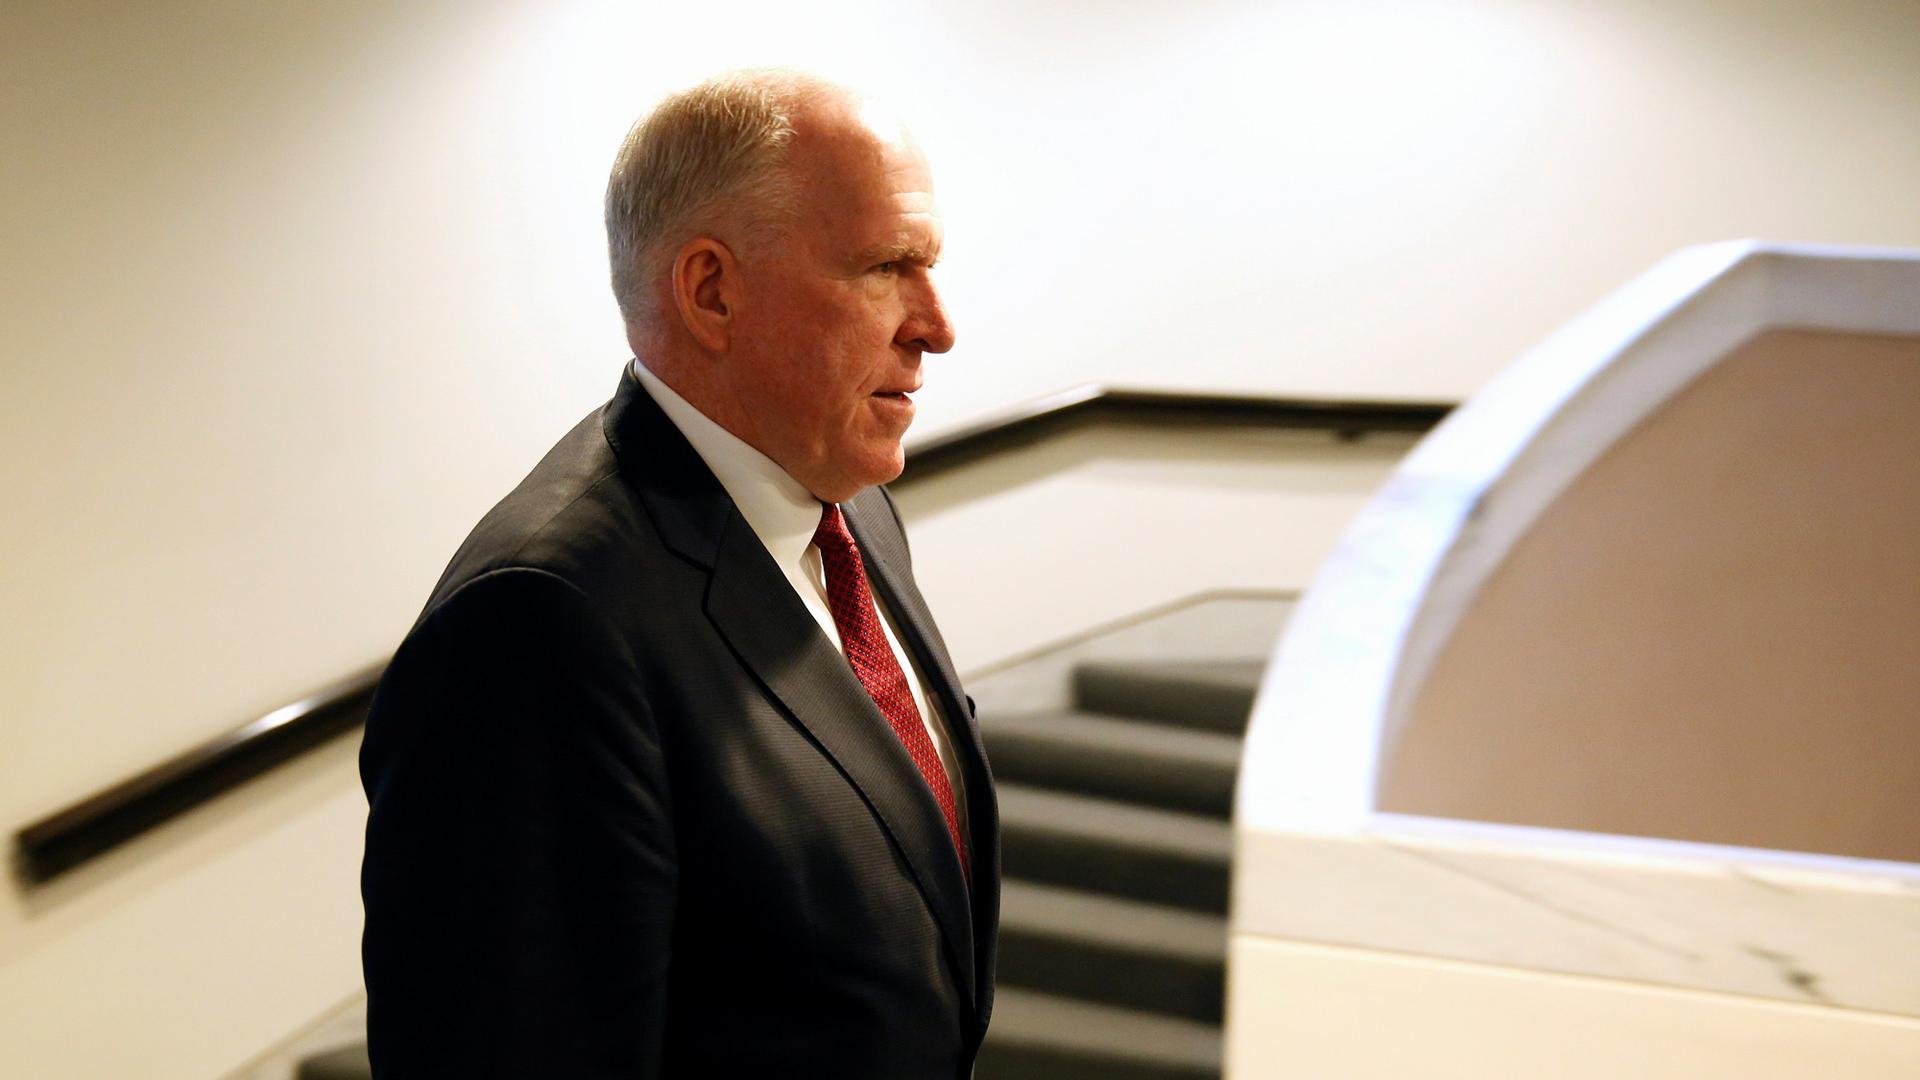 Former CIA Director John Brennan is shown wearing a suit and red tie departing from a Senate Intelligence Committee hearing in Washington, May 2018.